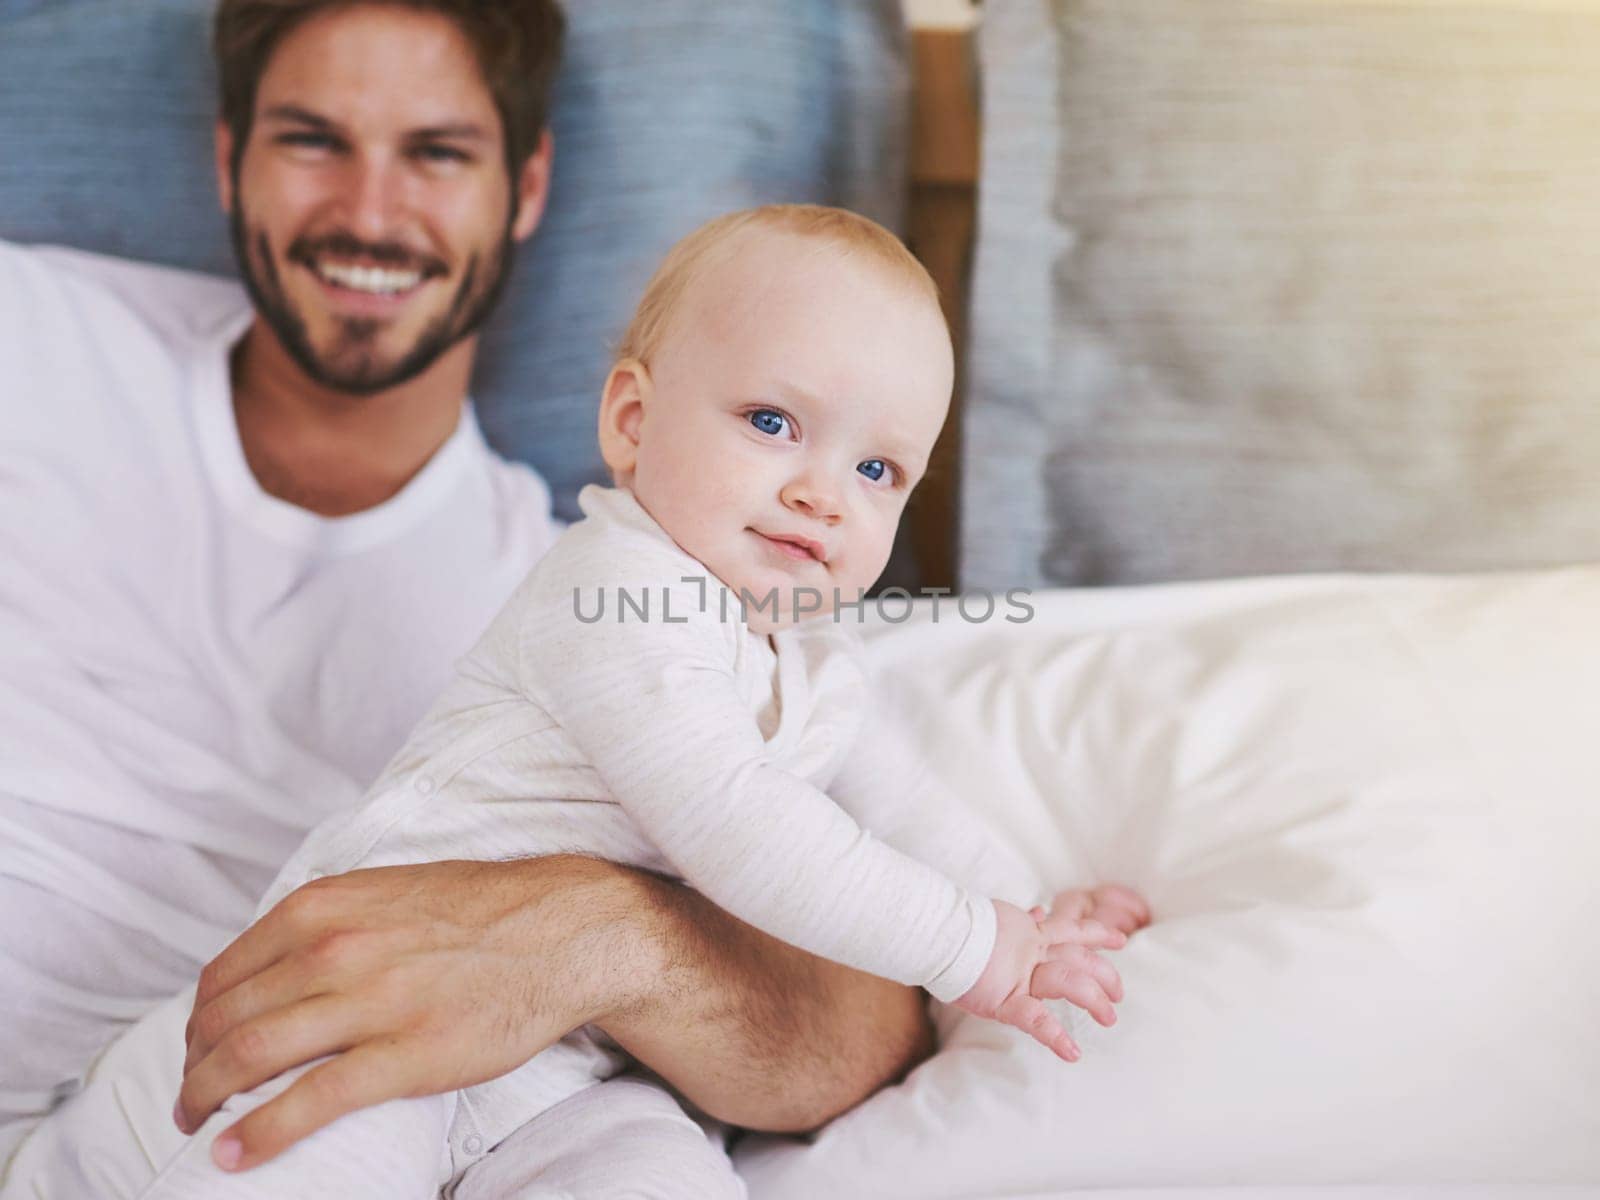 Family, happy and father with baby in bedroom for bonding, relationship and care for parenting. Love, portrait and dad playing with newborn infant for child development, support and affection in home.